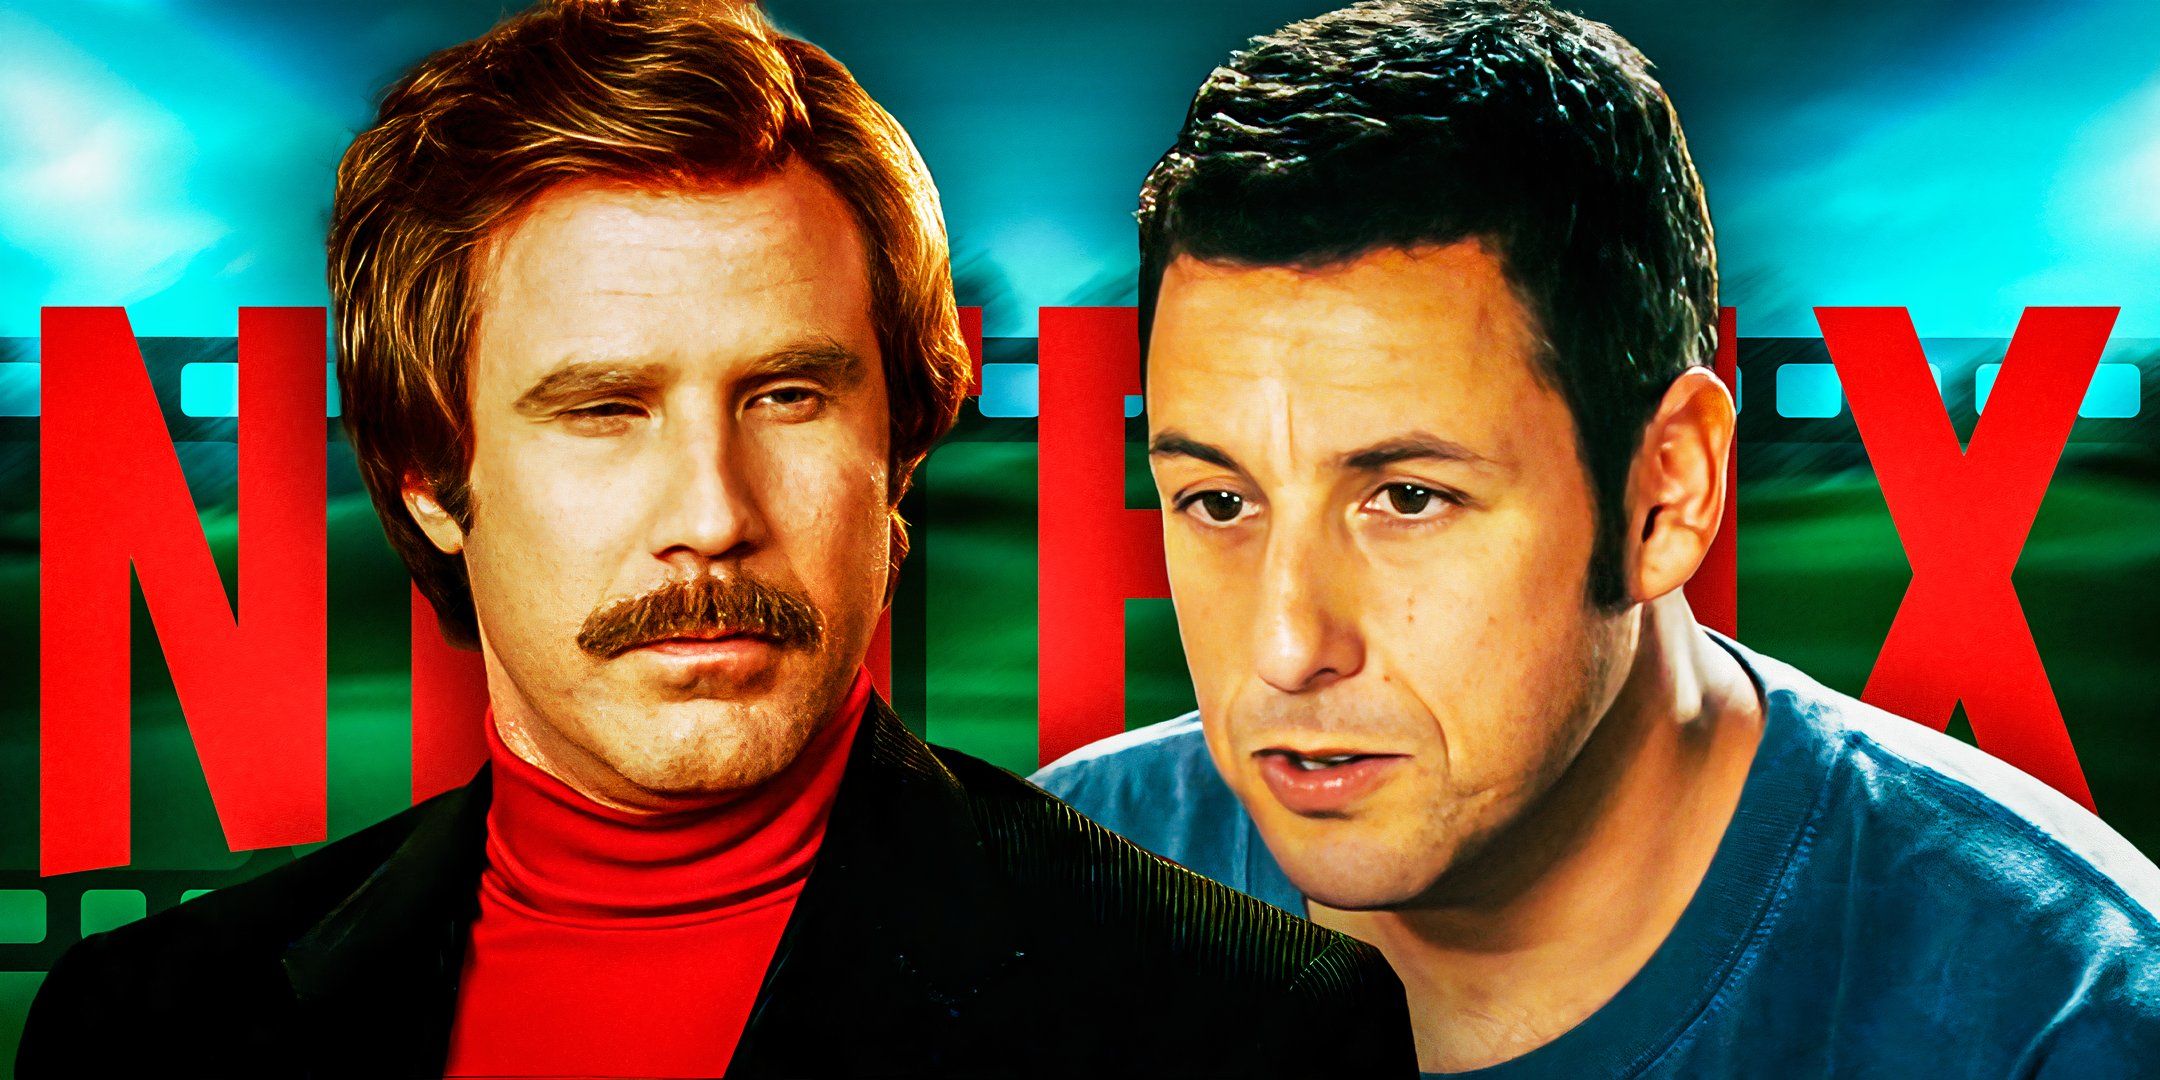 Will Ferrell as Ron Burgundy in Anchorman: The Legend of Ron Burgundy and Adam Sandler as Danny in Just Go with It